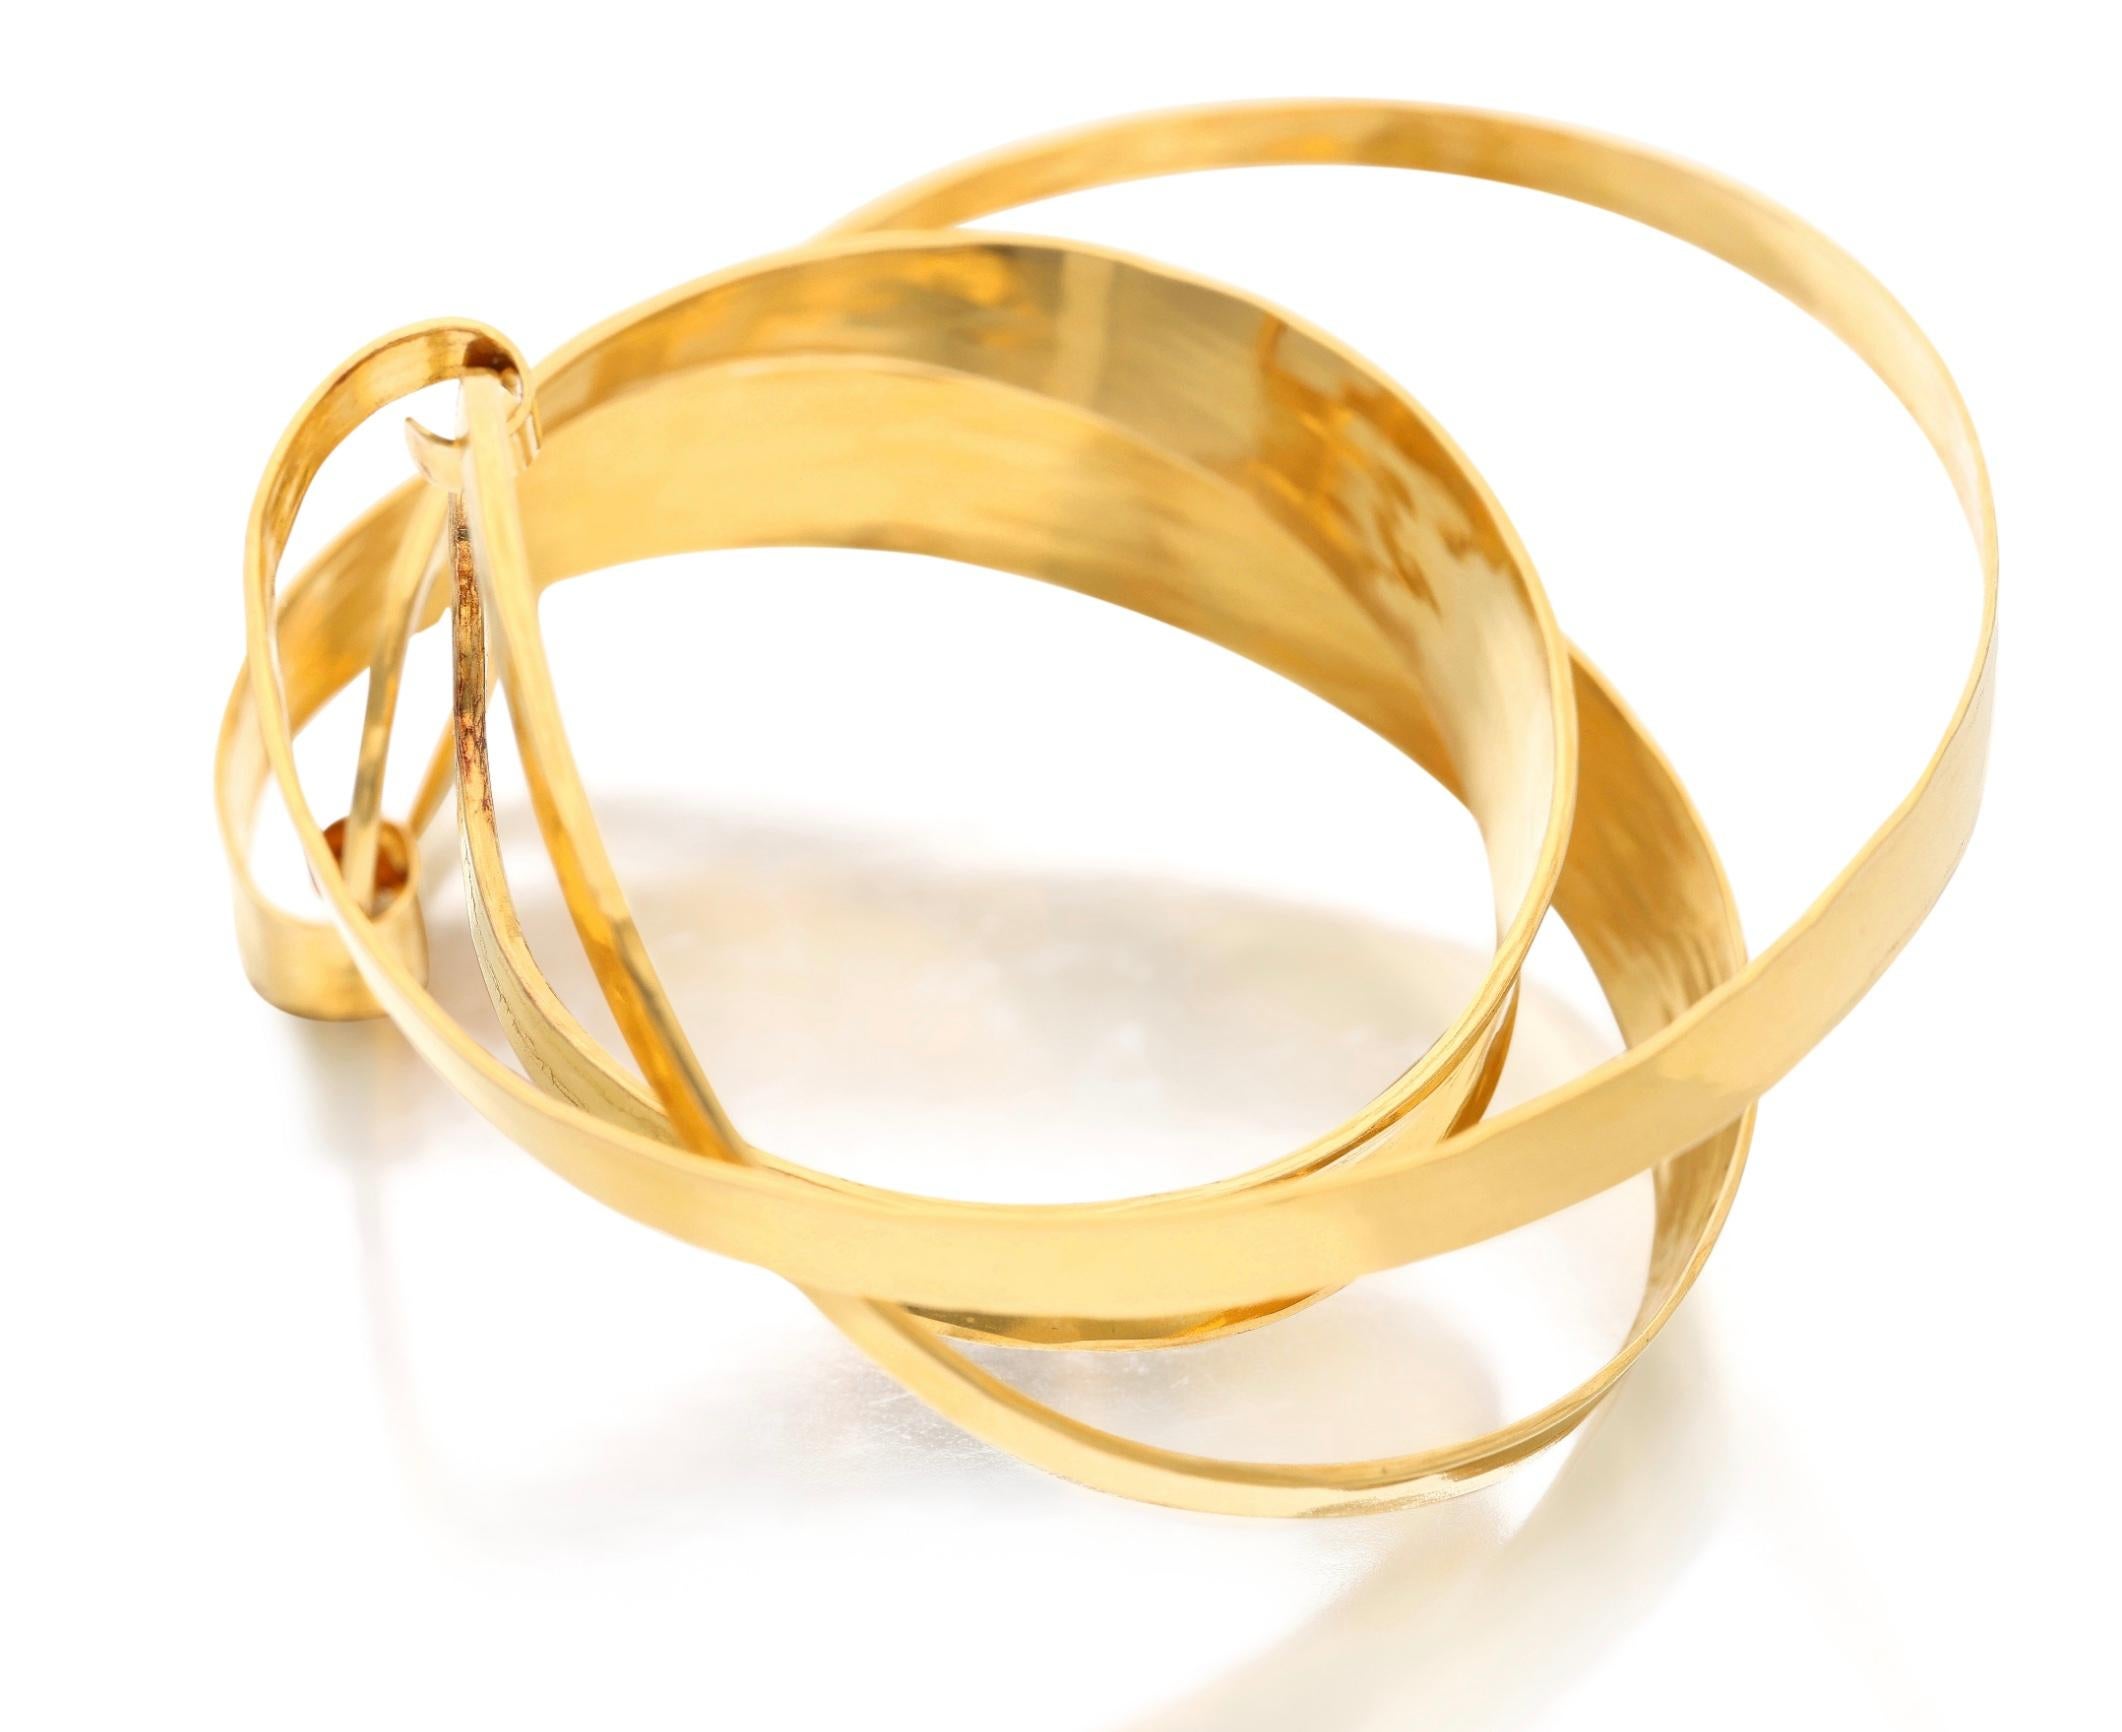 A gold sculptural cuff bracelet with a unique design. It is made out of 22 karat yellow gold with an inner circumference of 7 inches. Perfect for making a statement at an evening party. 